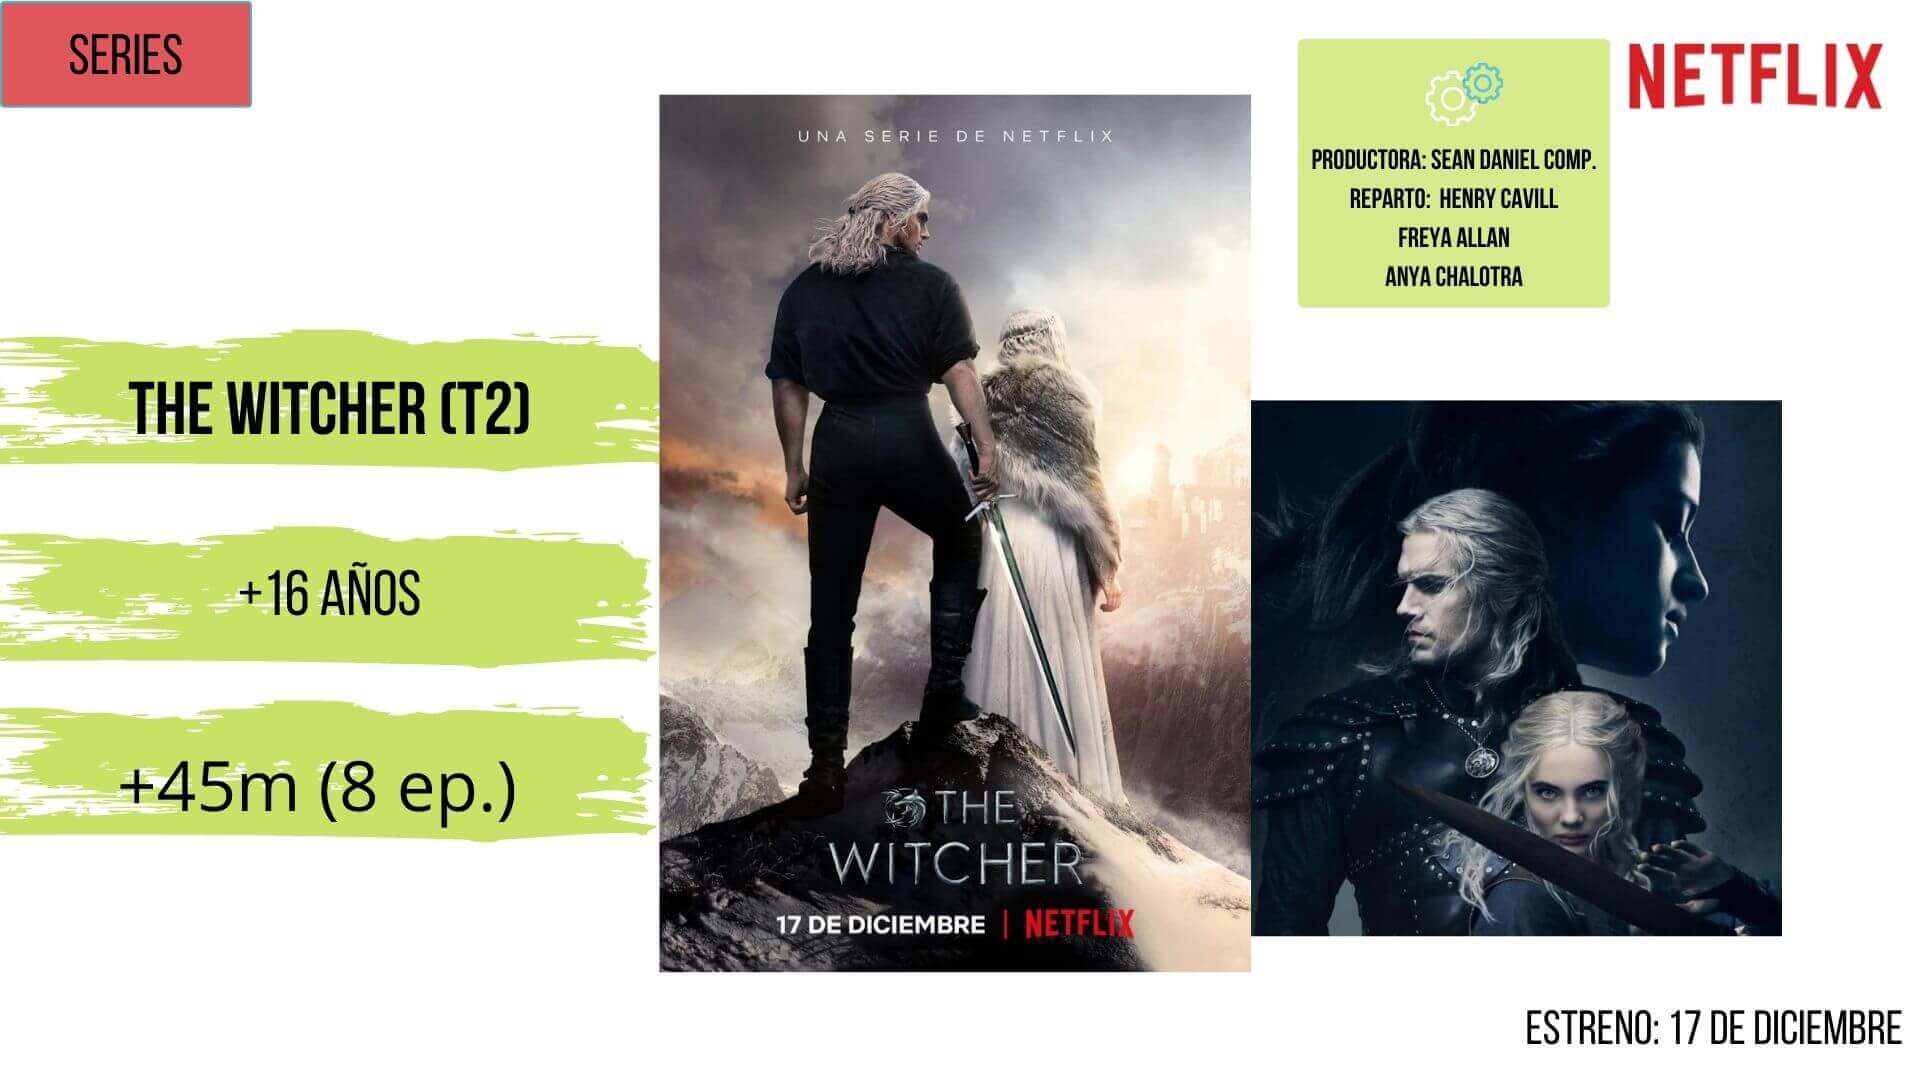 Serie The Witcher familiar